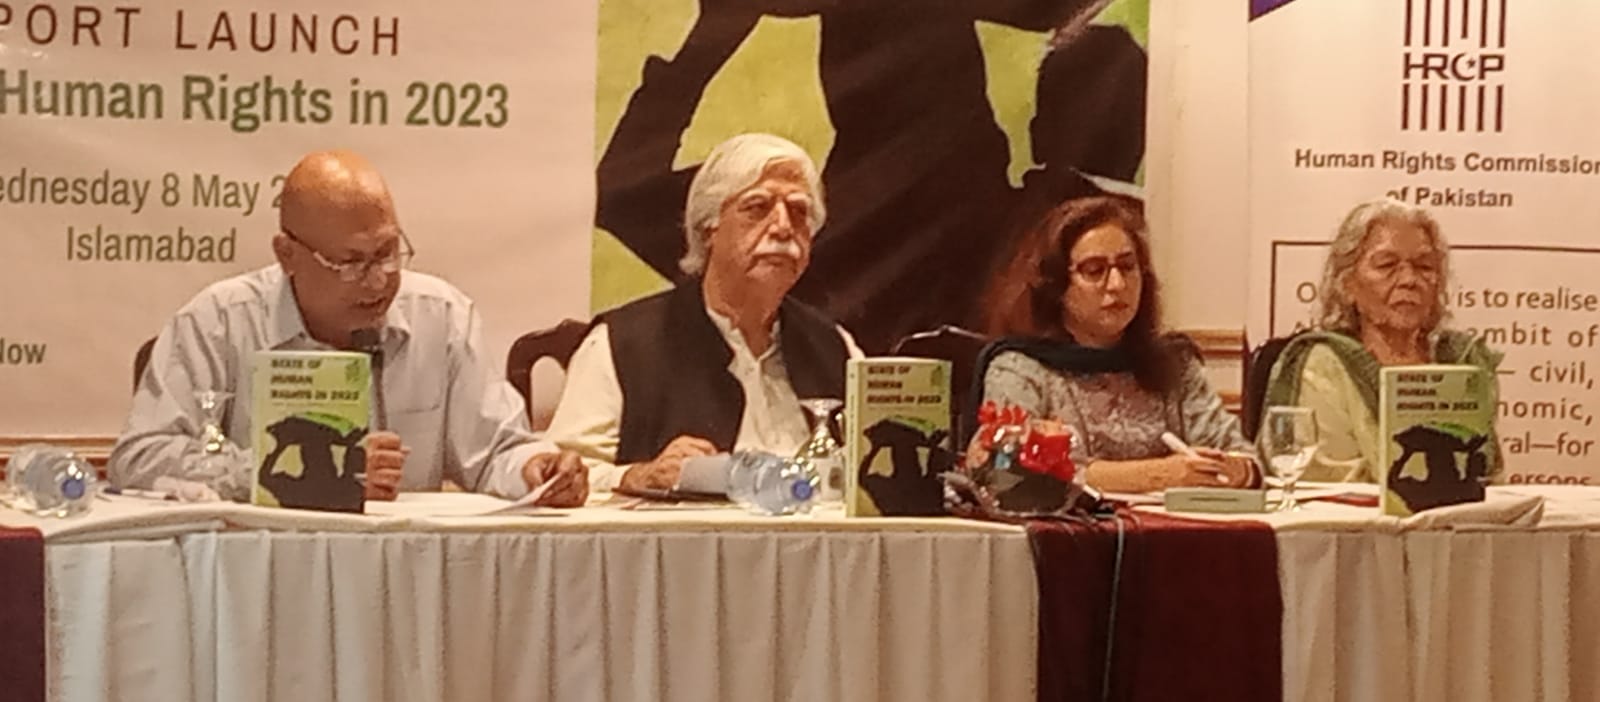 2023 Marked by Gross Economic Injustice, Disregard for Constitution: HRCP